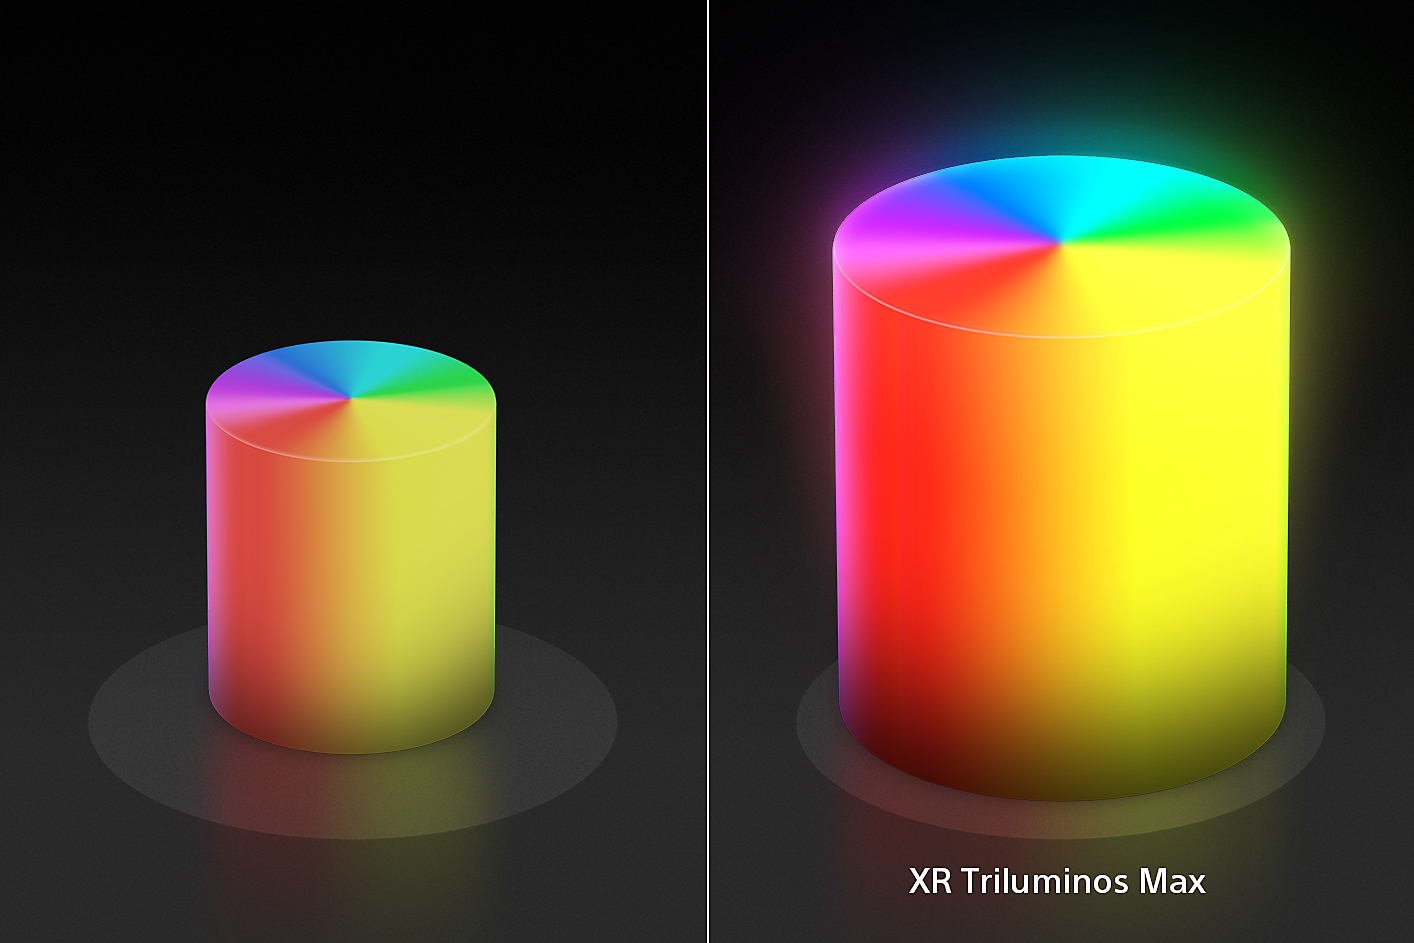 Split screen showing two candle-shaped cones of colour, a smaller one on the left and a larger one on the right with the enhanced colours and textures of XR Triluminos Max